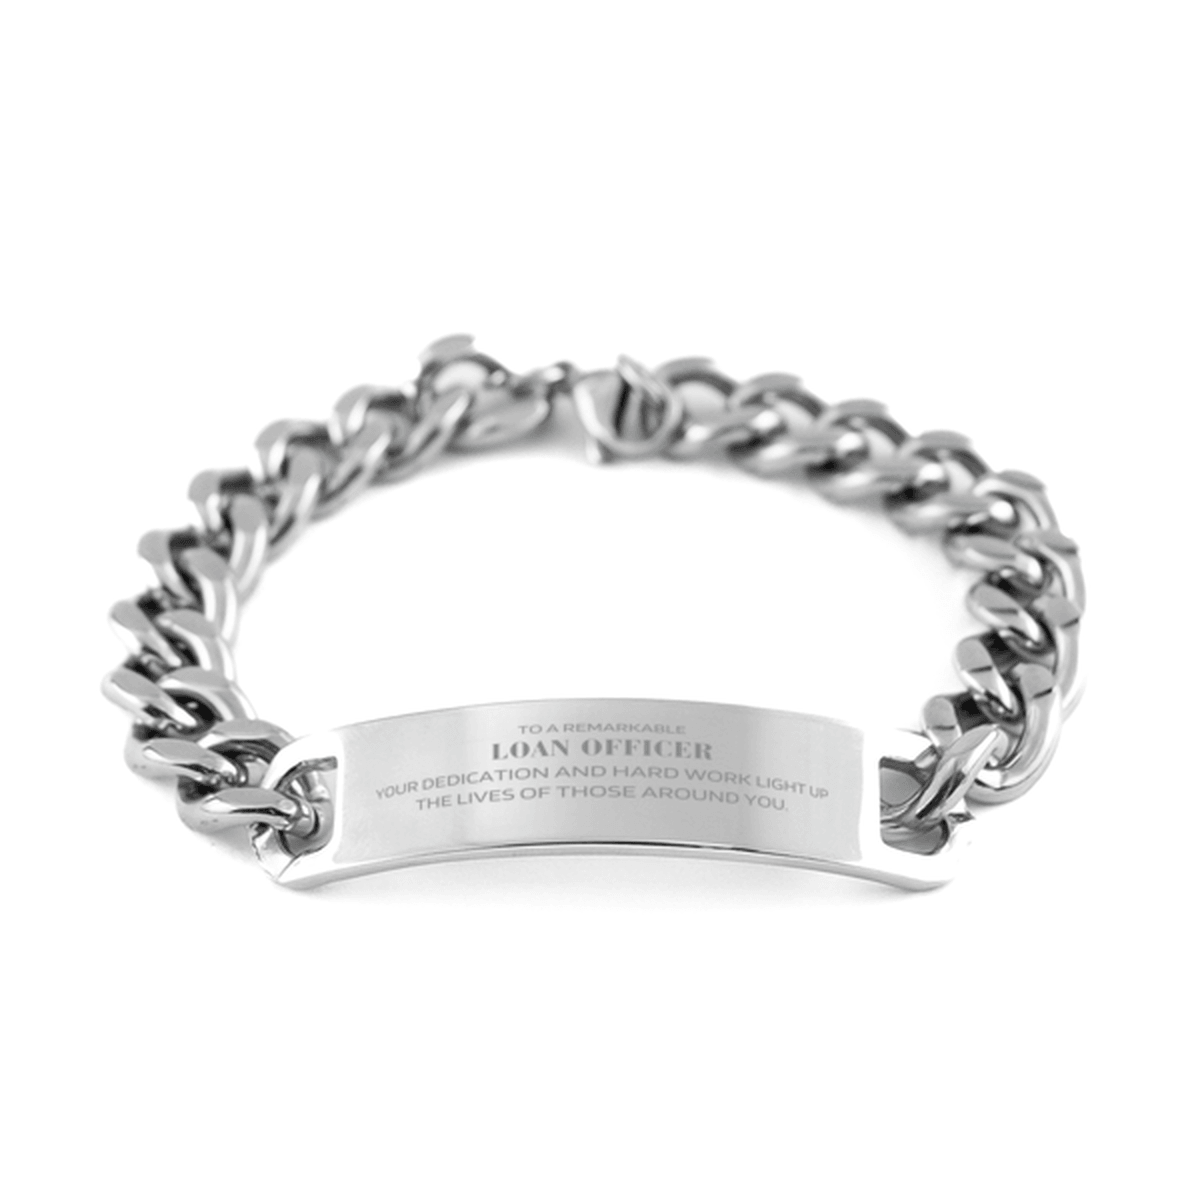 Remarkable Loan Officer Gifts, Your dedication and hard work, Inspirational Birthday Christmas Unique Cuban Chain Stainless Steel Bracelet For Loan Officer, Coworkers, Men, Women, Friends - Mallard Moon Gift Shop